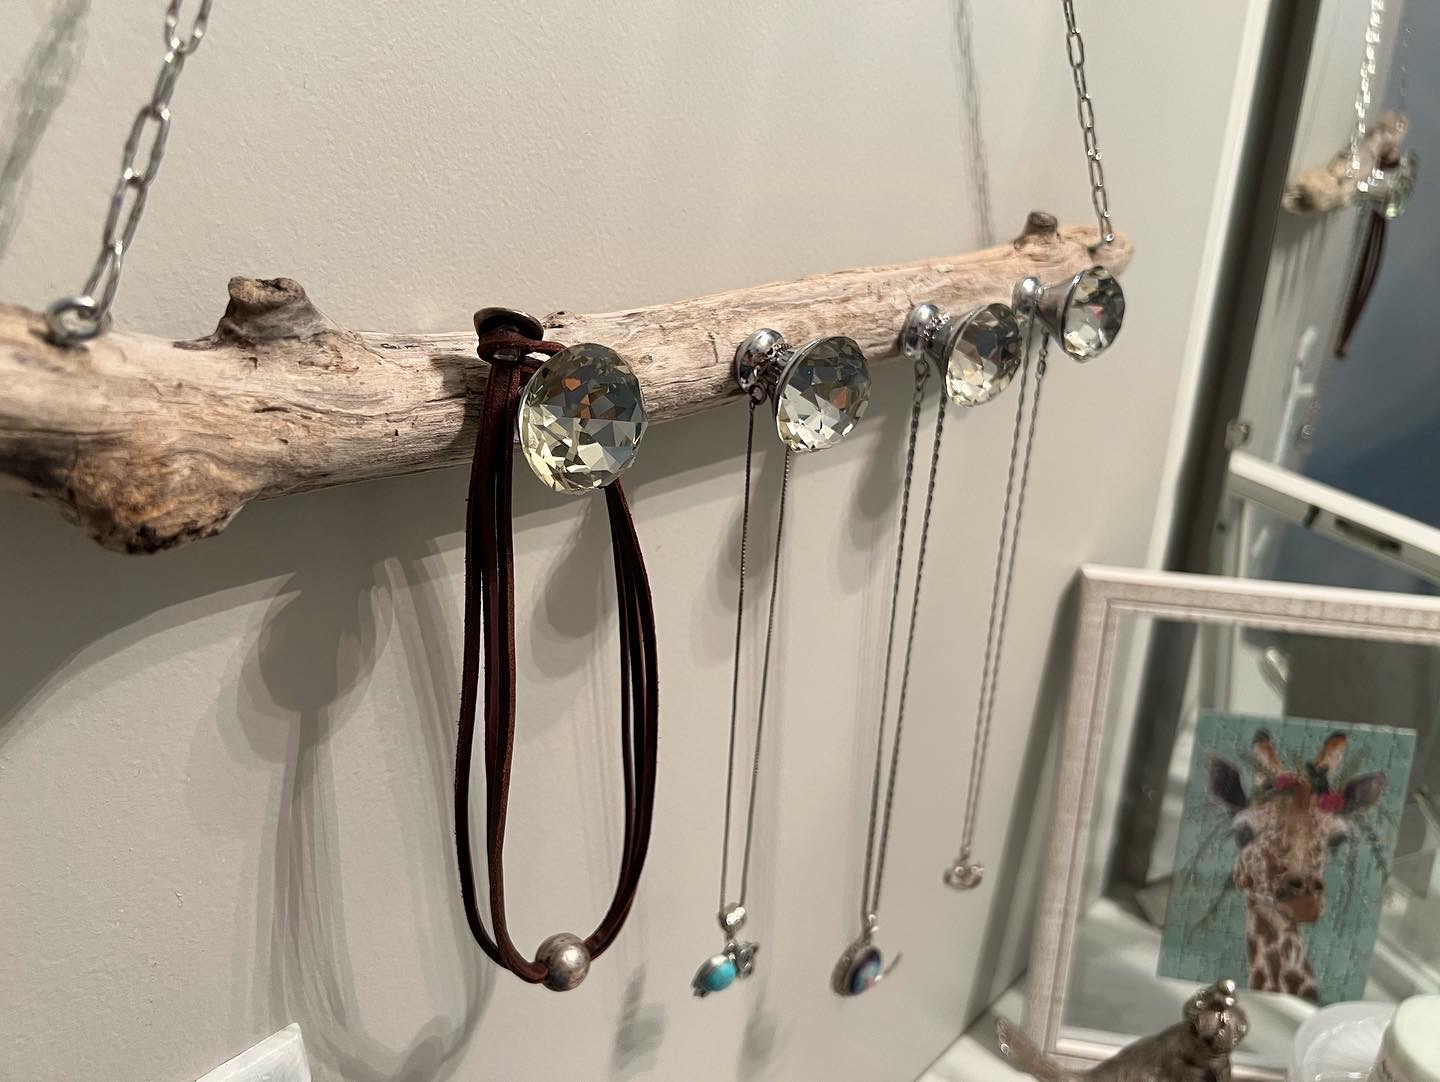 Driftwood Necklace Hanger With Crystal Knobs - Little Bit Of This And That  Gifts